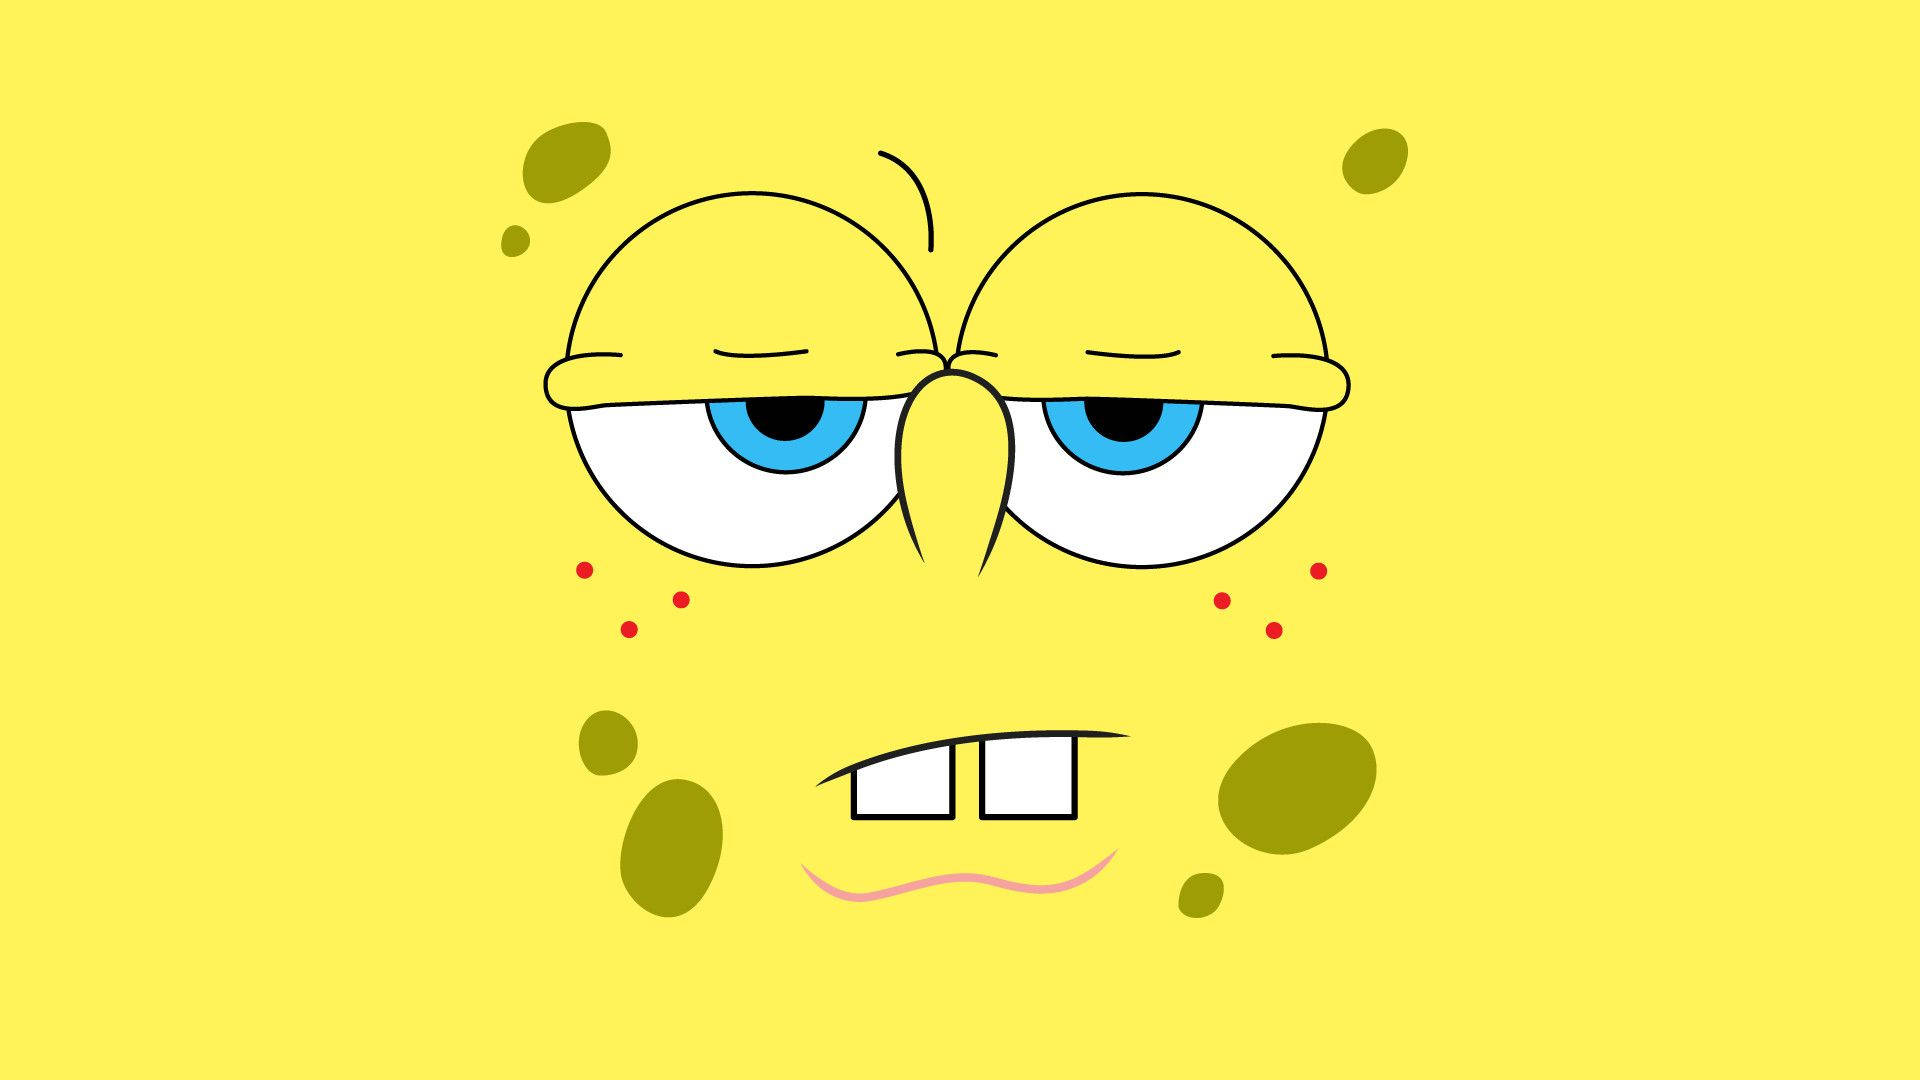 Cool Spongebob Is Here To Make Your Day Even Brighter